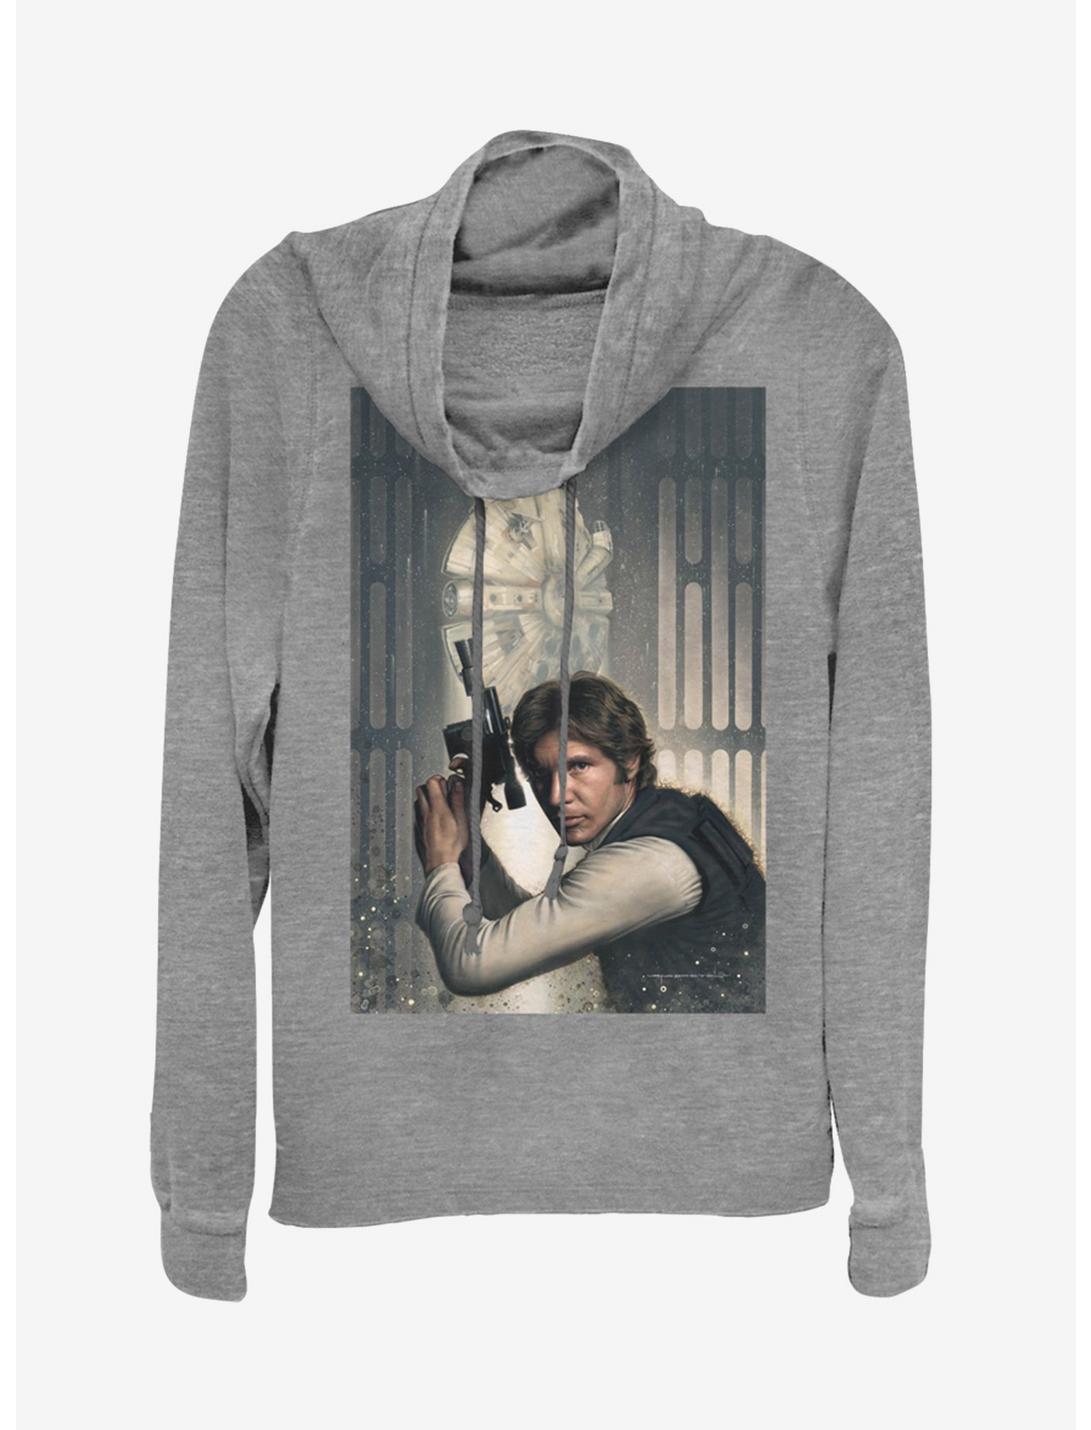 Star Wars Han Solo Painting Cowlneck Long-Sleeve Girls Top, GRAY HTR, hi-res